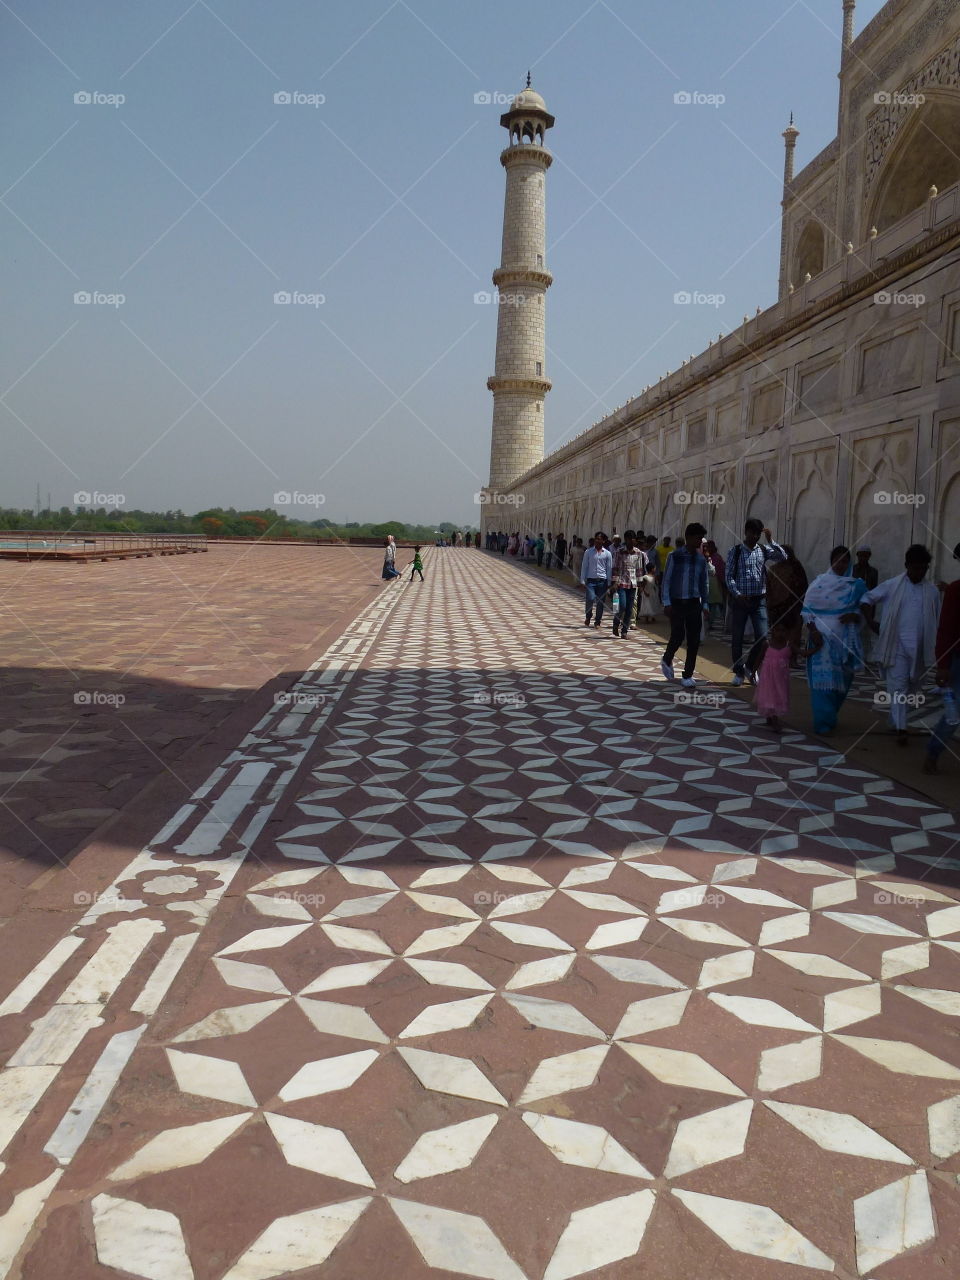 Visiting Akra and the Taj Mahal is a great experience -to be able to see the structures is amazing